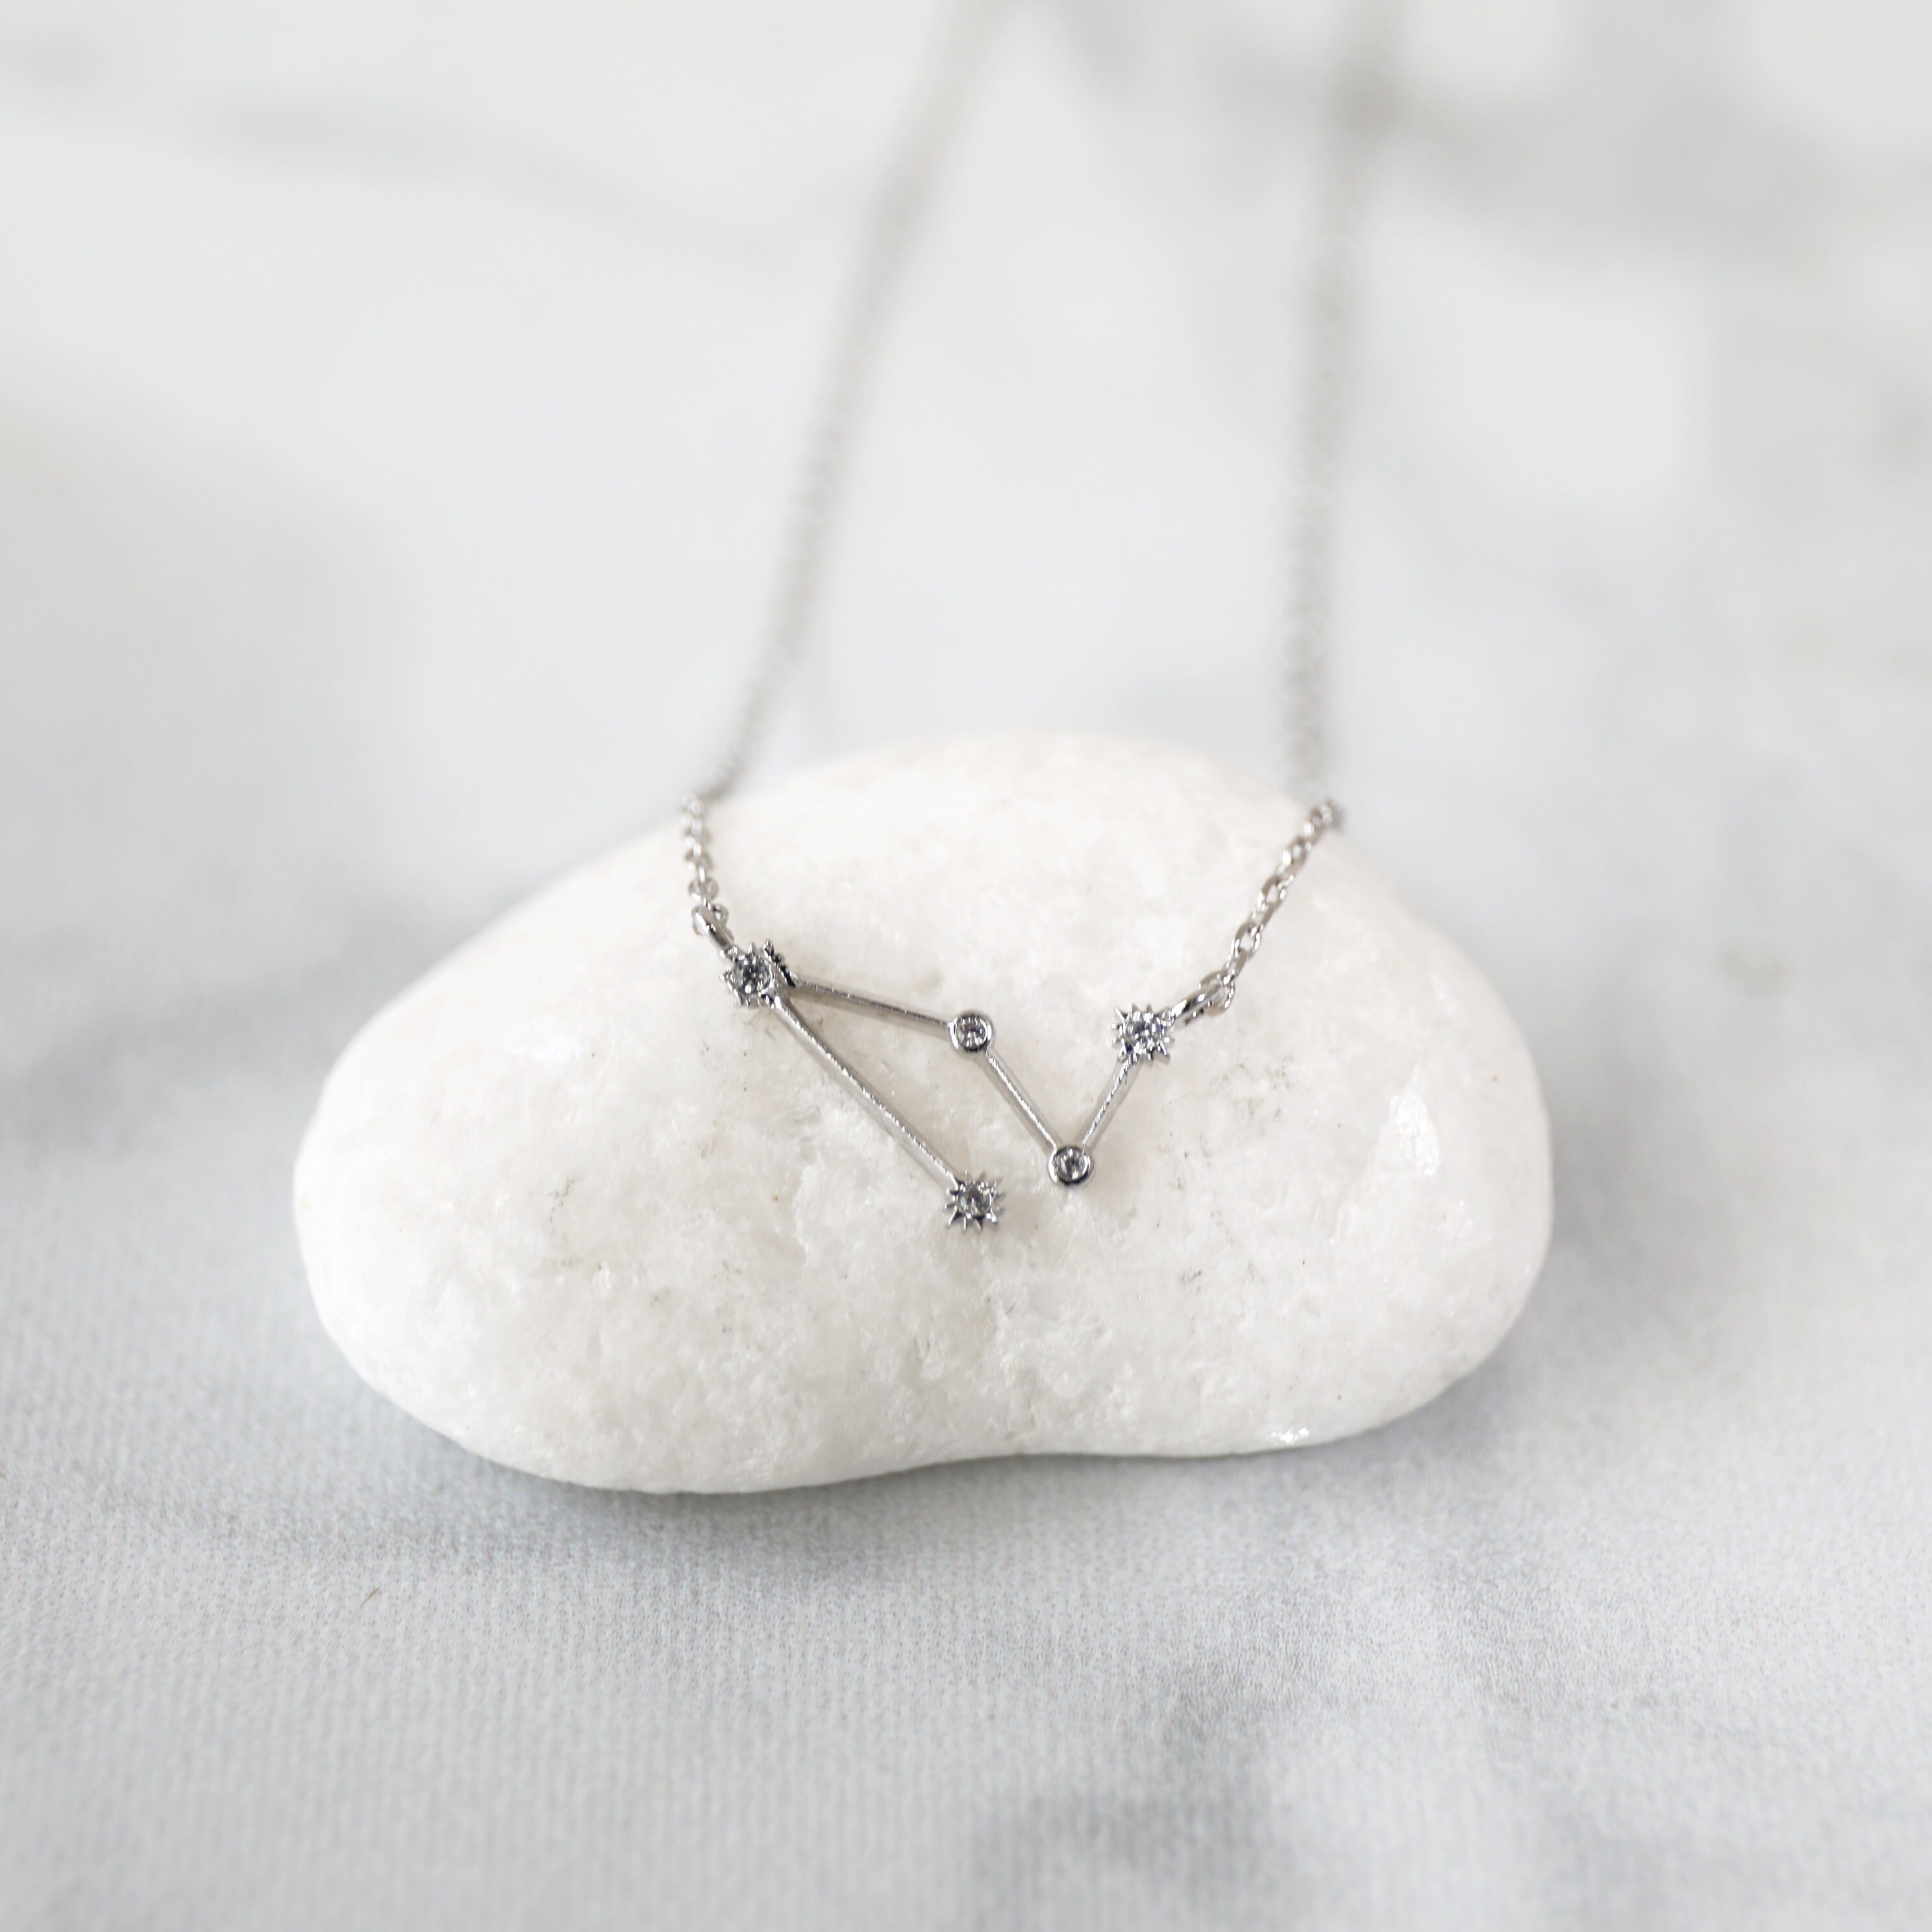 Capricorn Necklace, Zodiac Jewelry, Celestial Jewelry, Constellation Necklace , December Birthday Gift, January Gift, Bridesmaid Gift